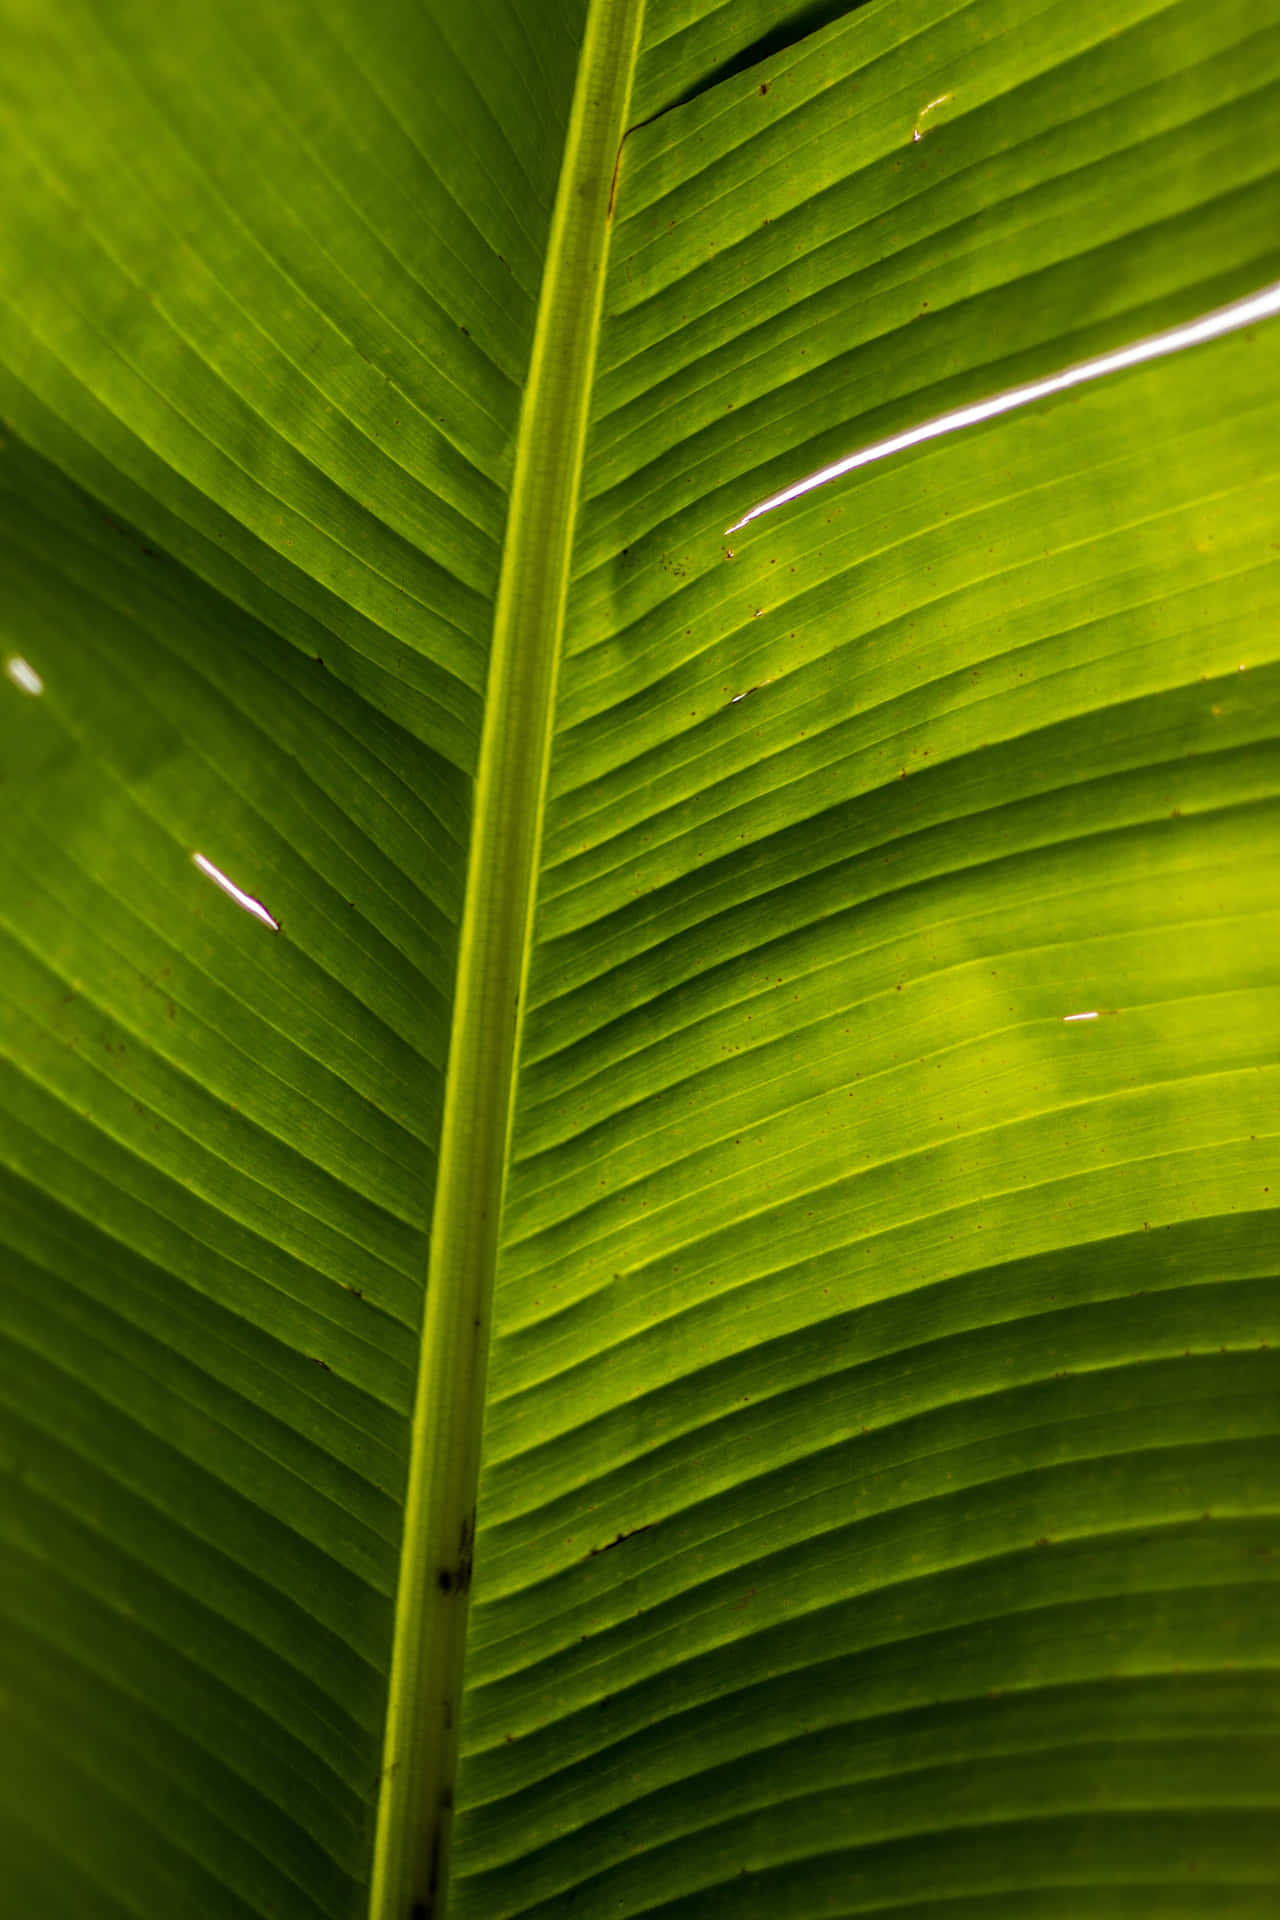 "A lush banana leaf background to bring a natural feel to your decorations".